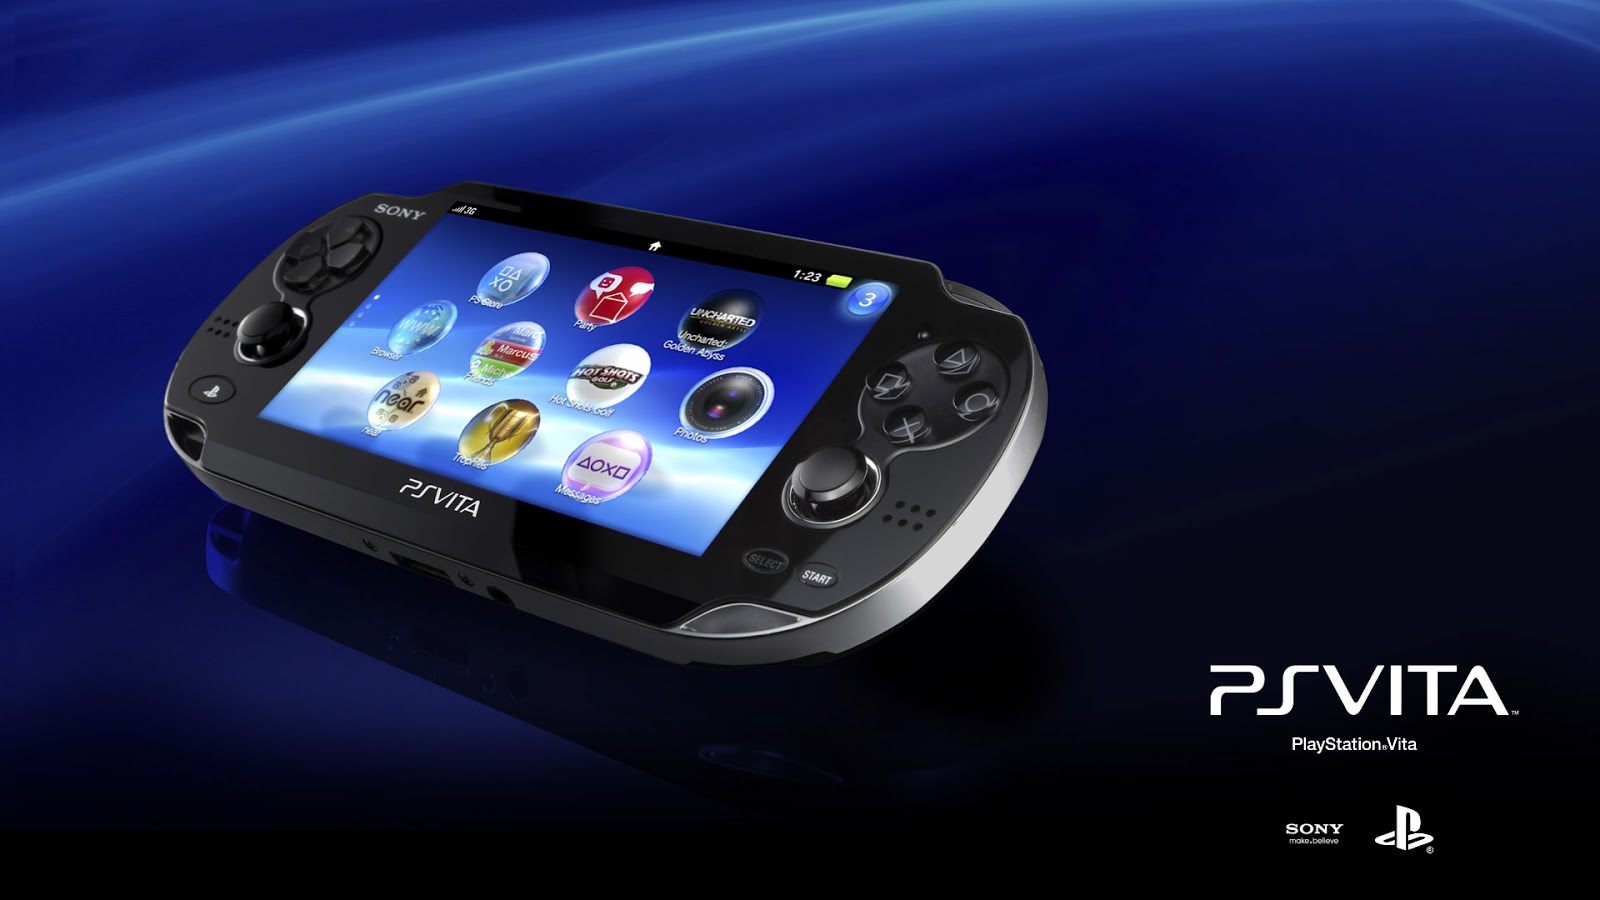 is there a working psp vita emulator